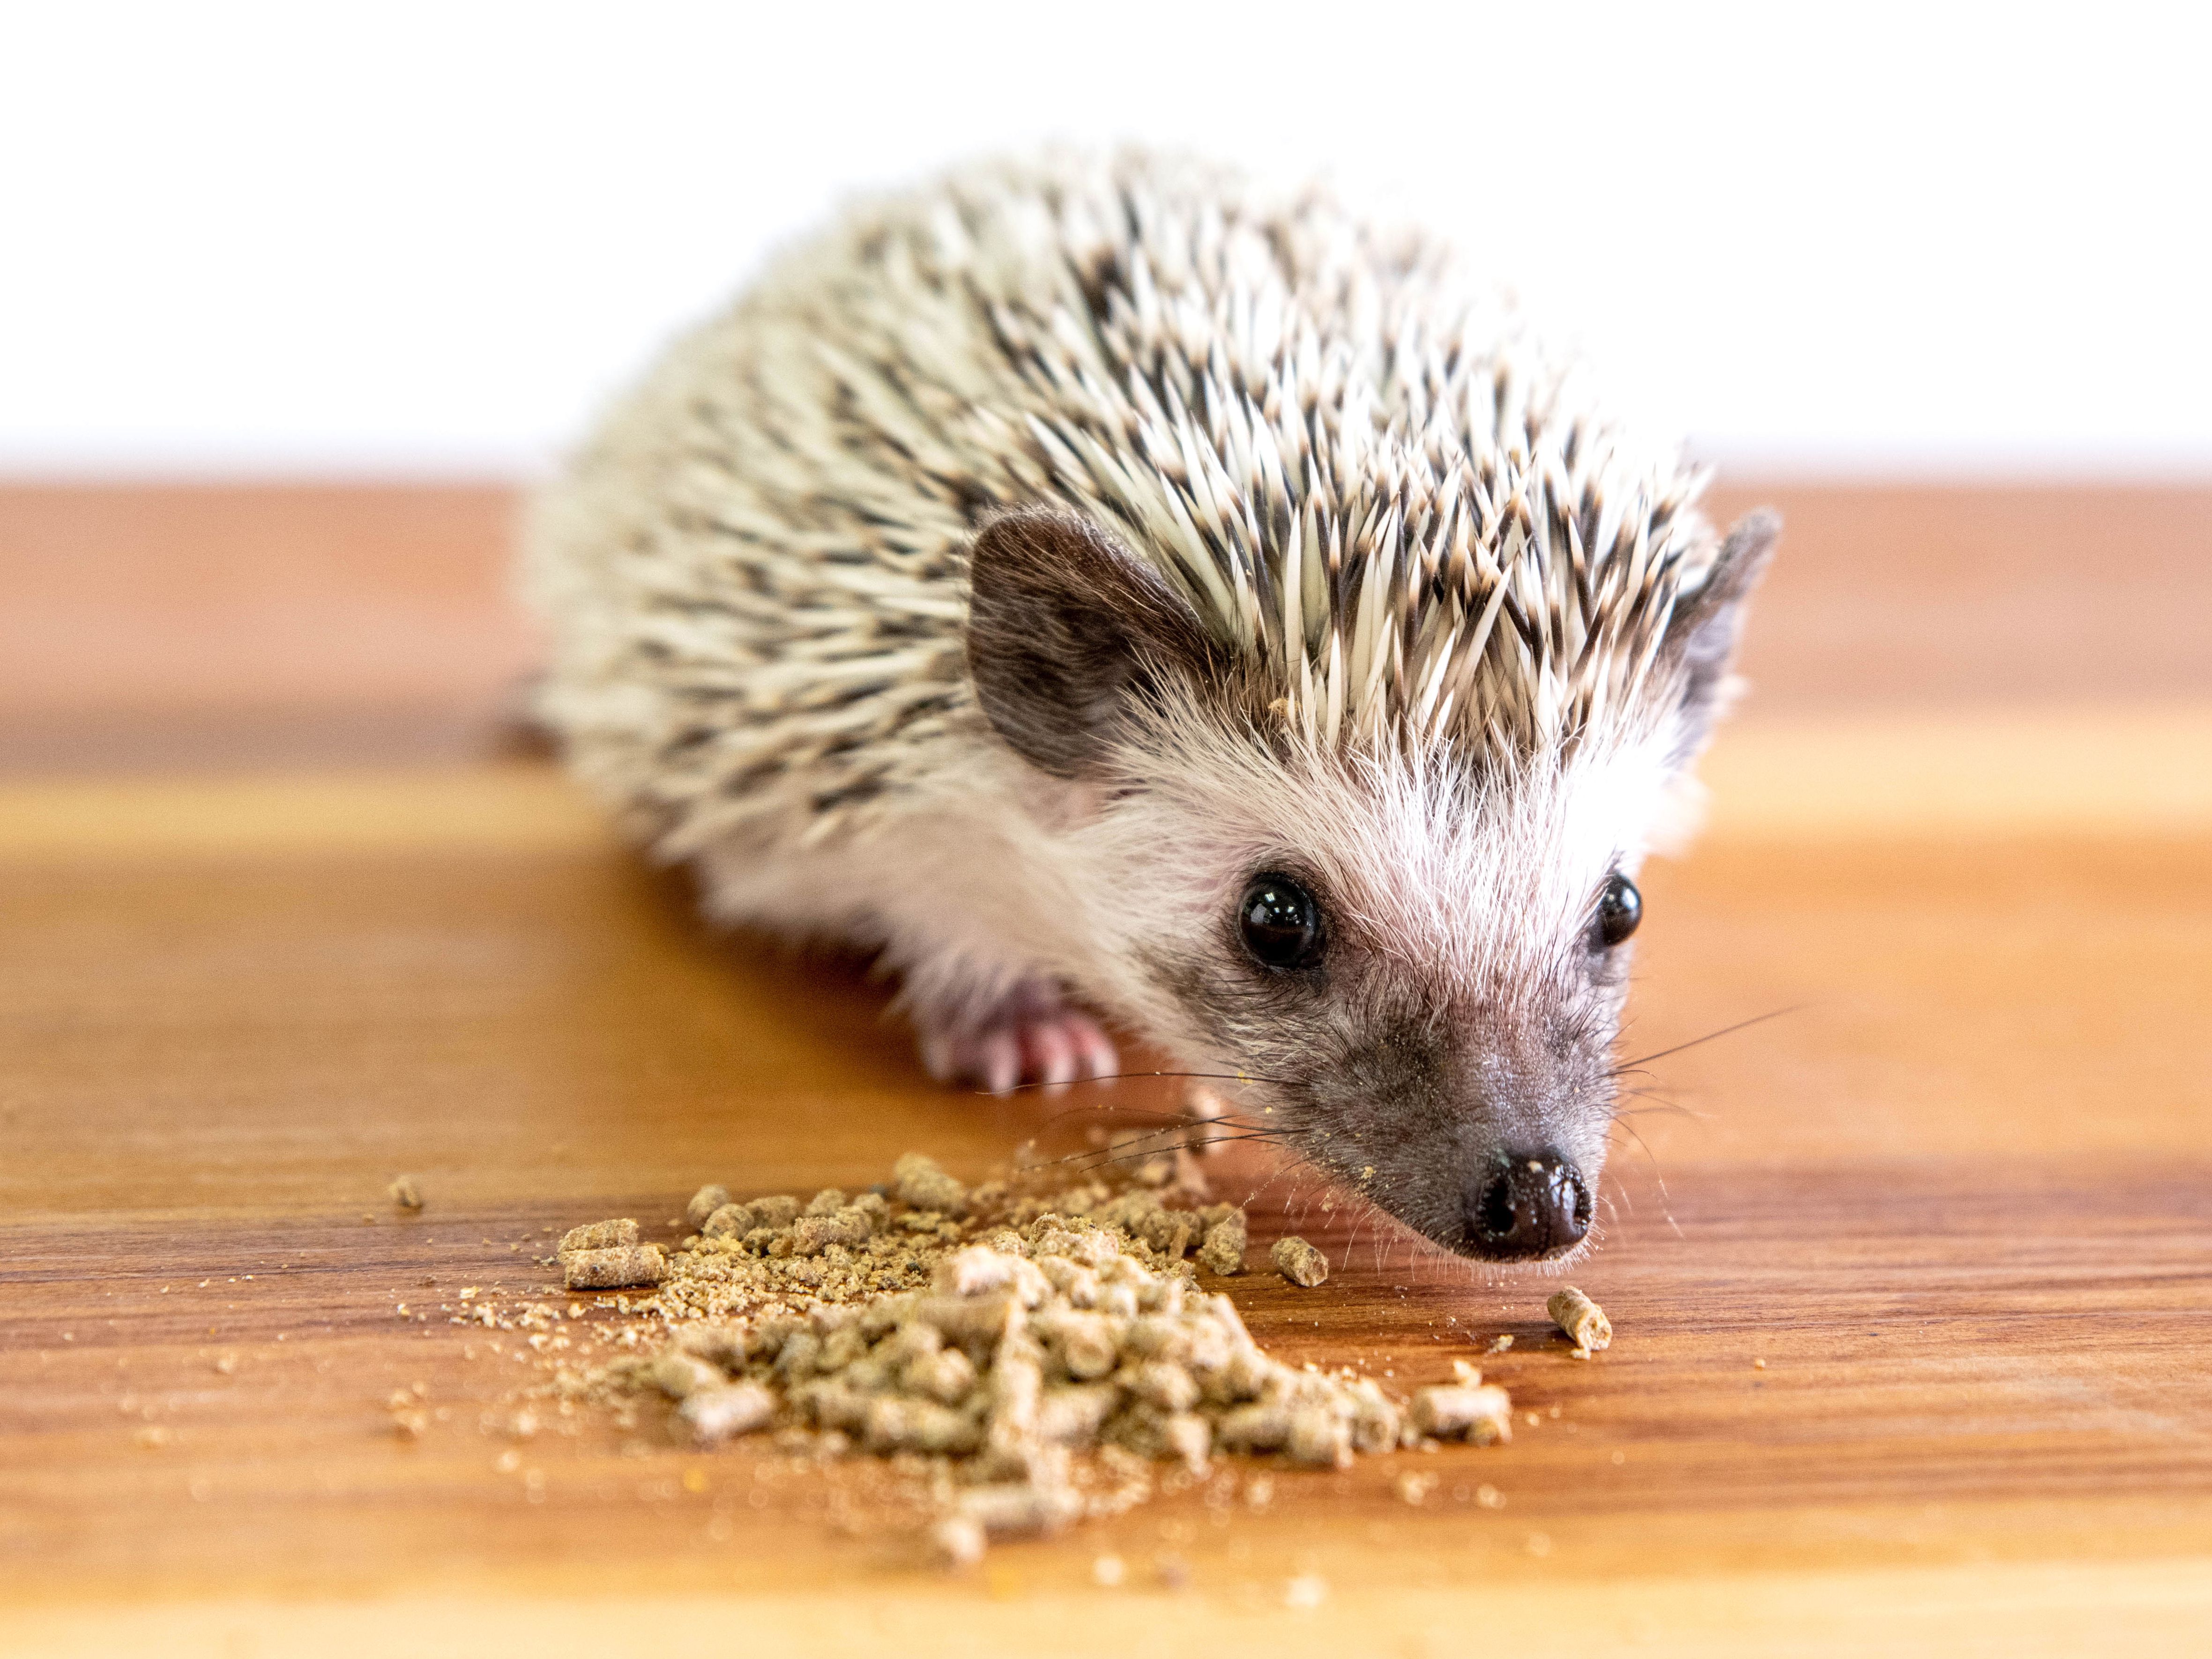 What do hedgehogs like to eat?